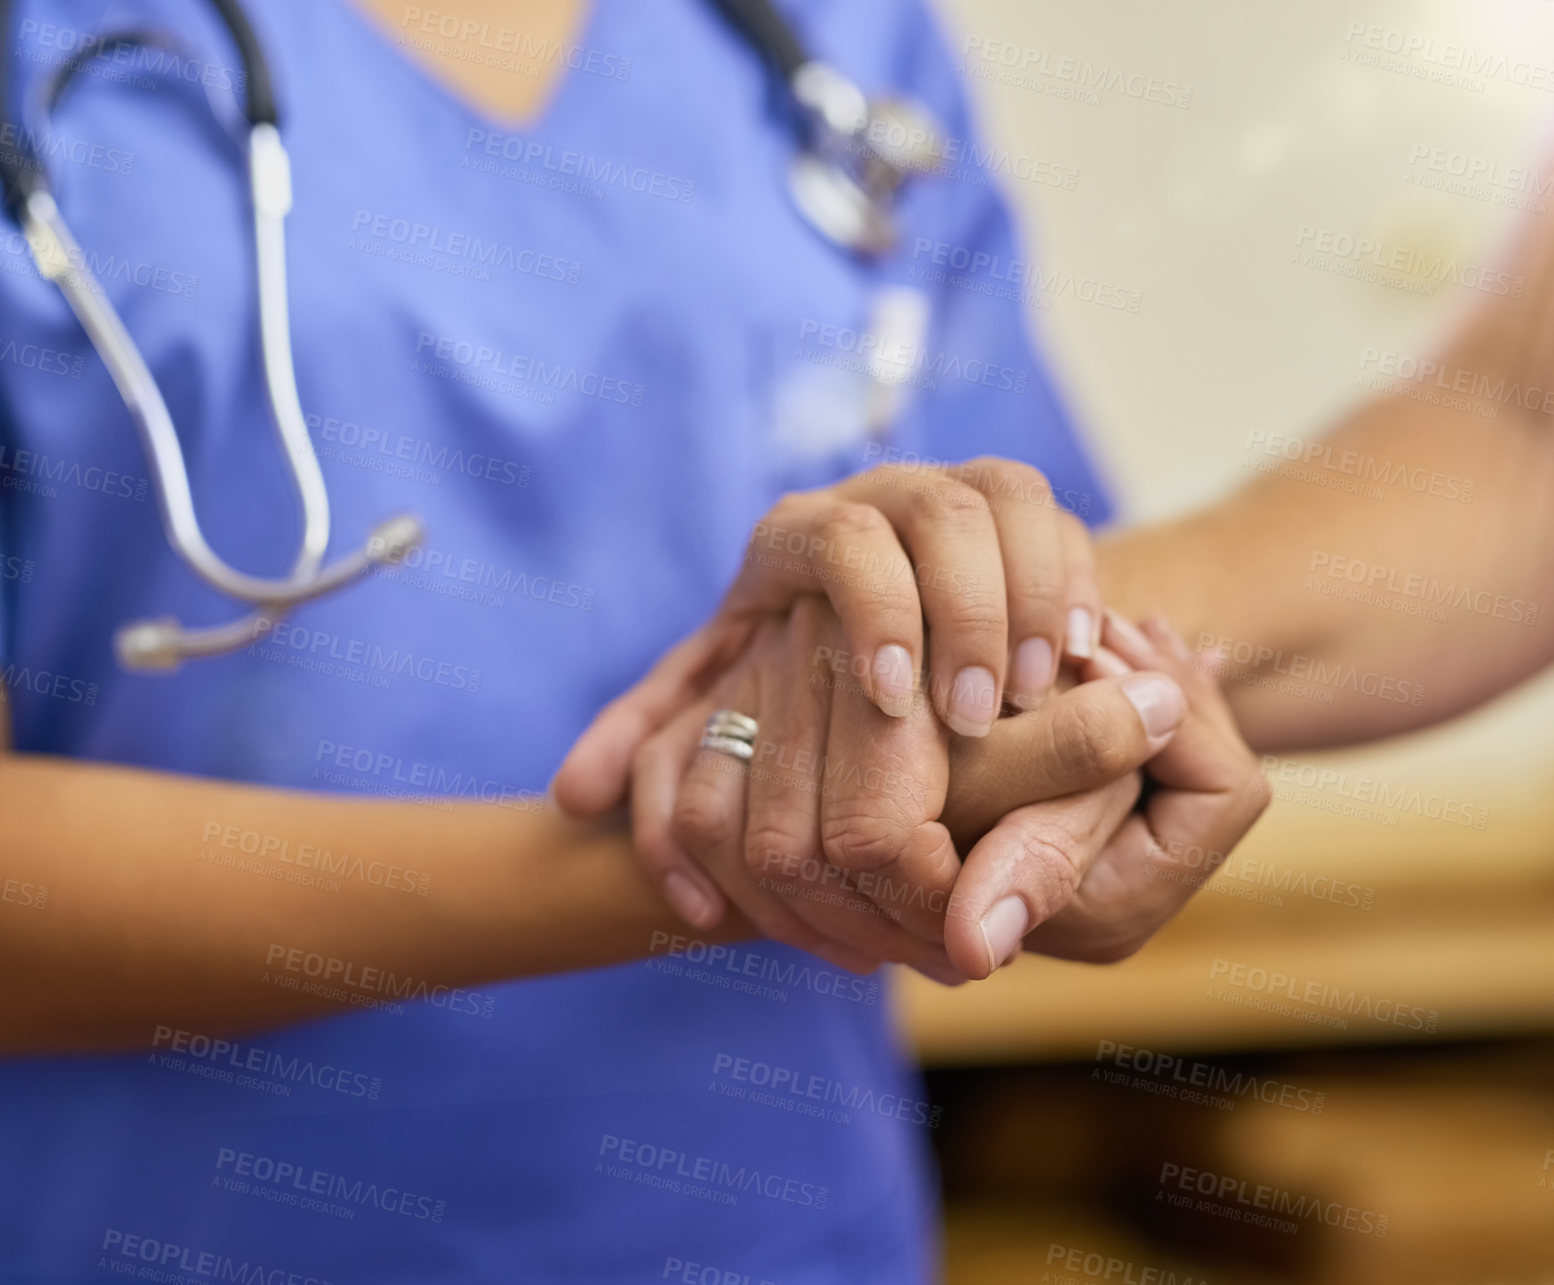 Buy stock photo Cropped shot of a nurse holding a senior woman's hands in comfort